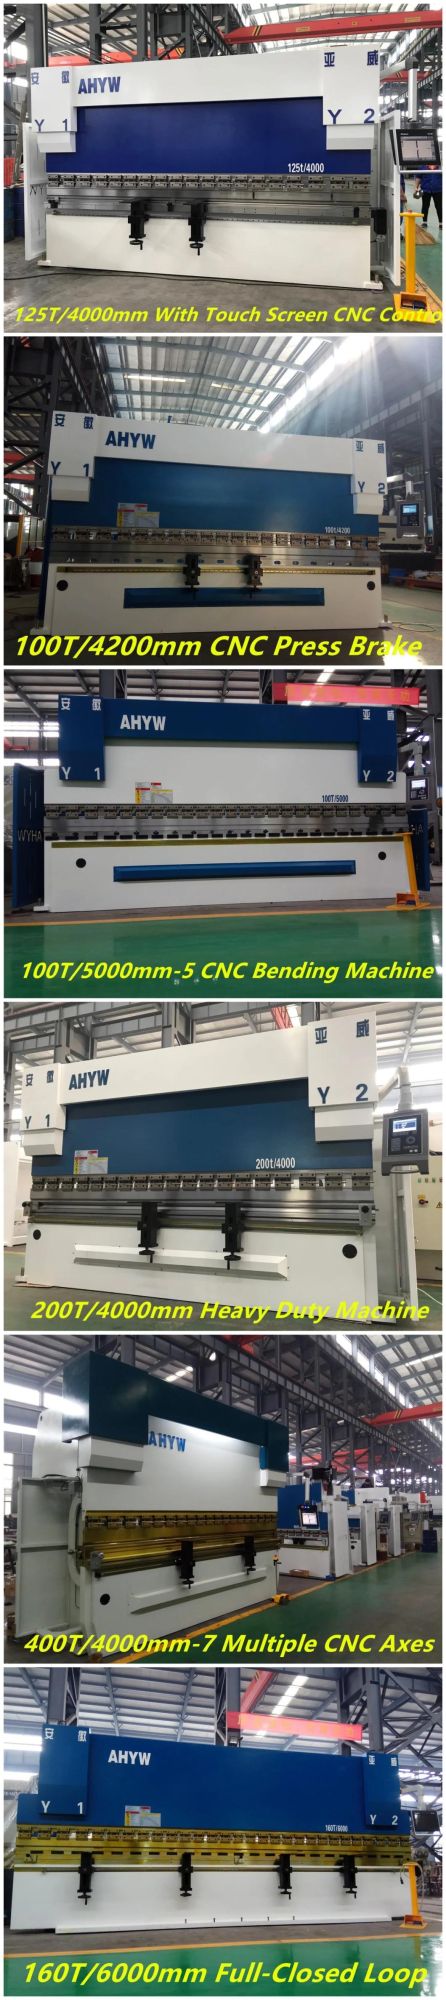 Tandem CNC Press Brake with Twins Machine on Double Bending Length